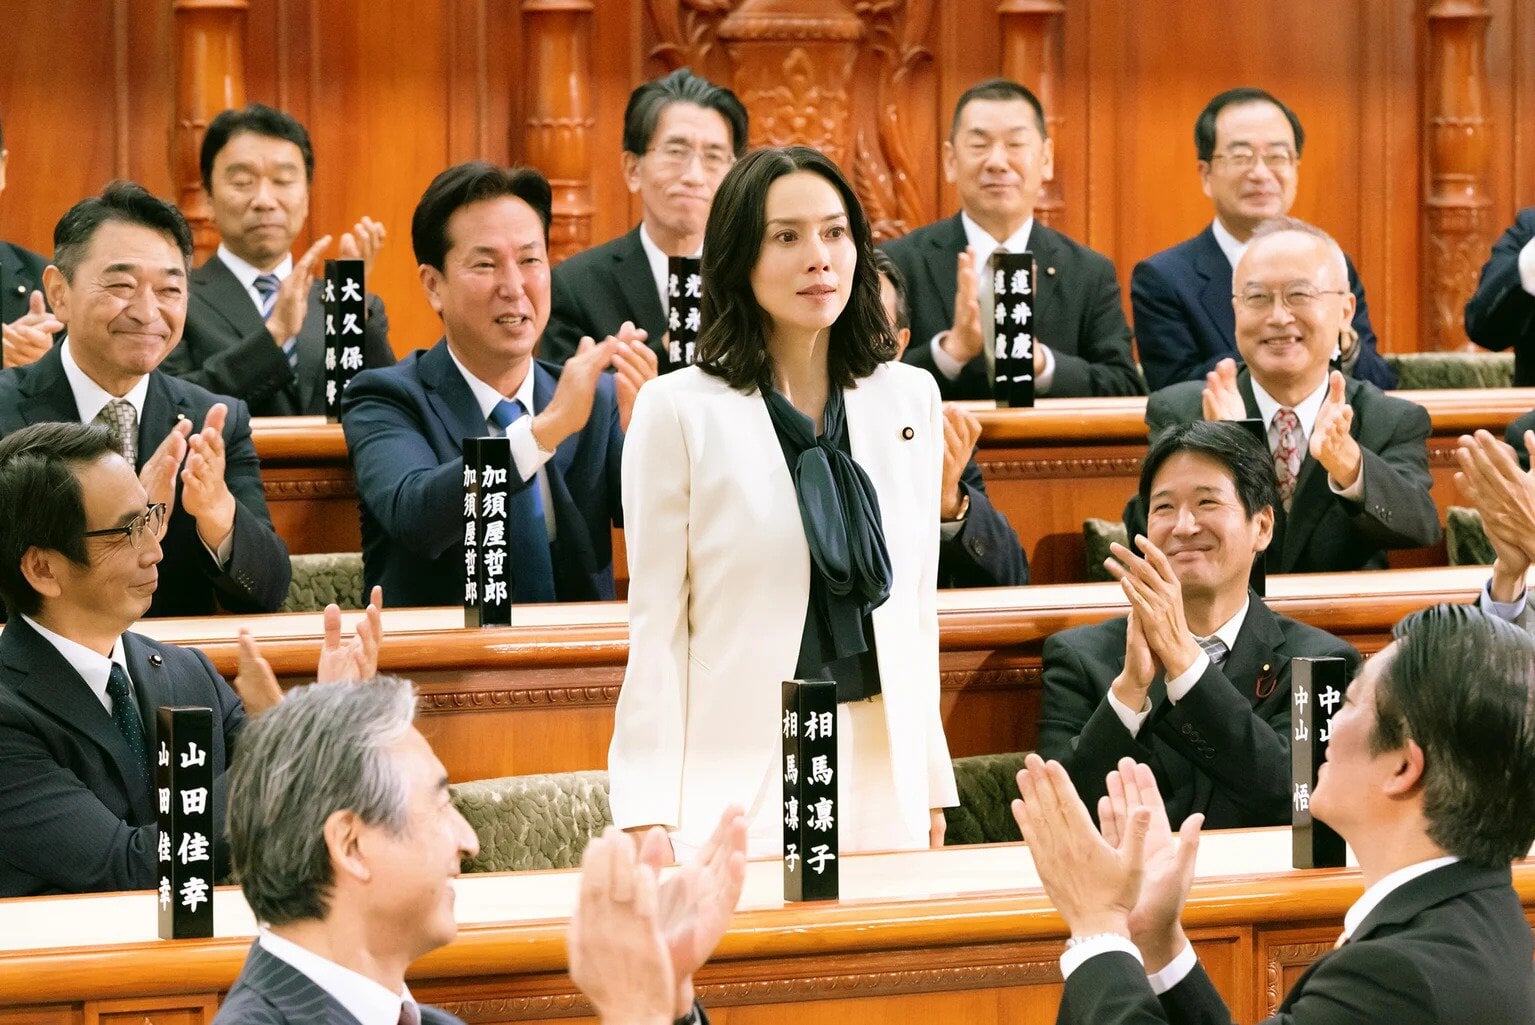 First Gentleman: Japan Gets Its First Female Prime Minister... In a Movie |  Tokyo Weekender